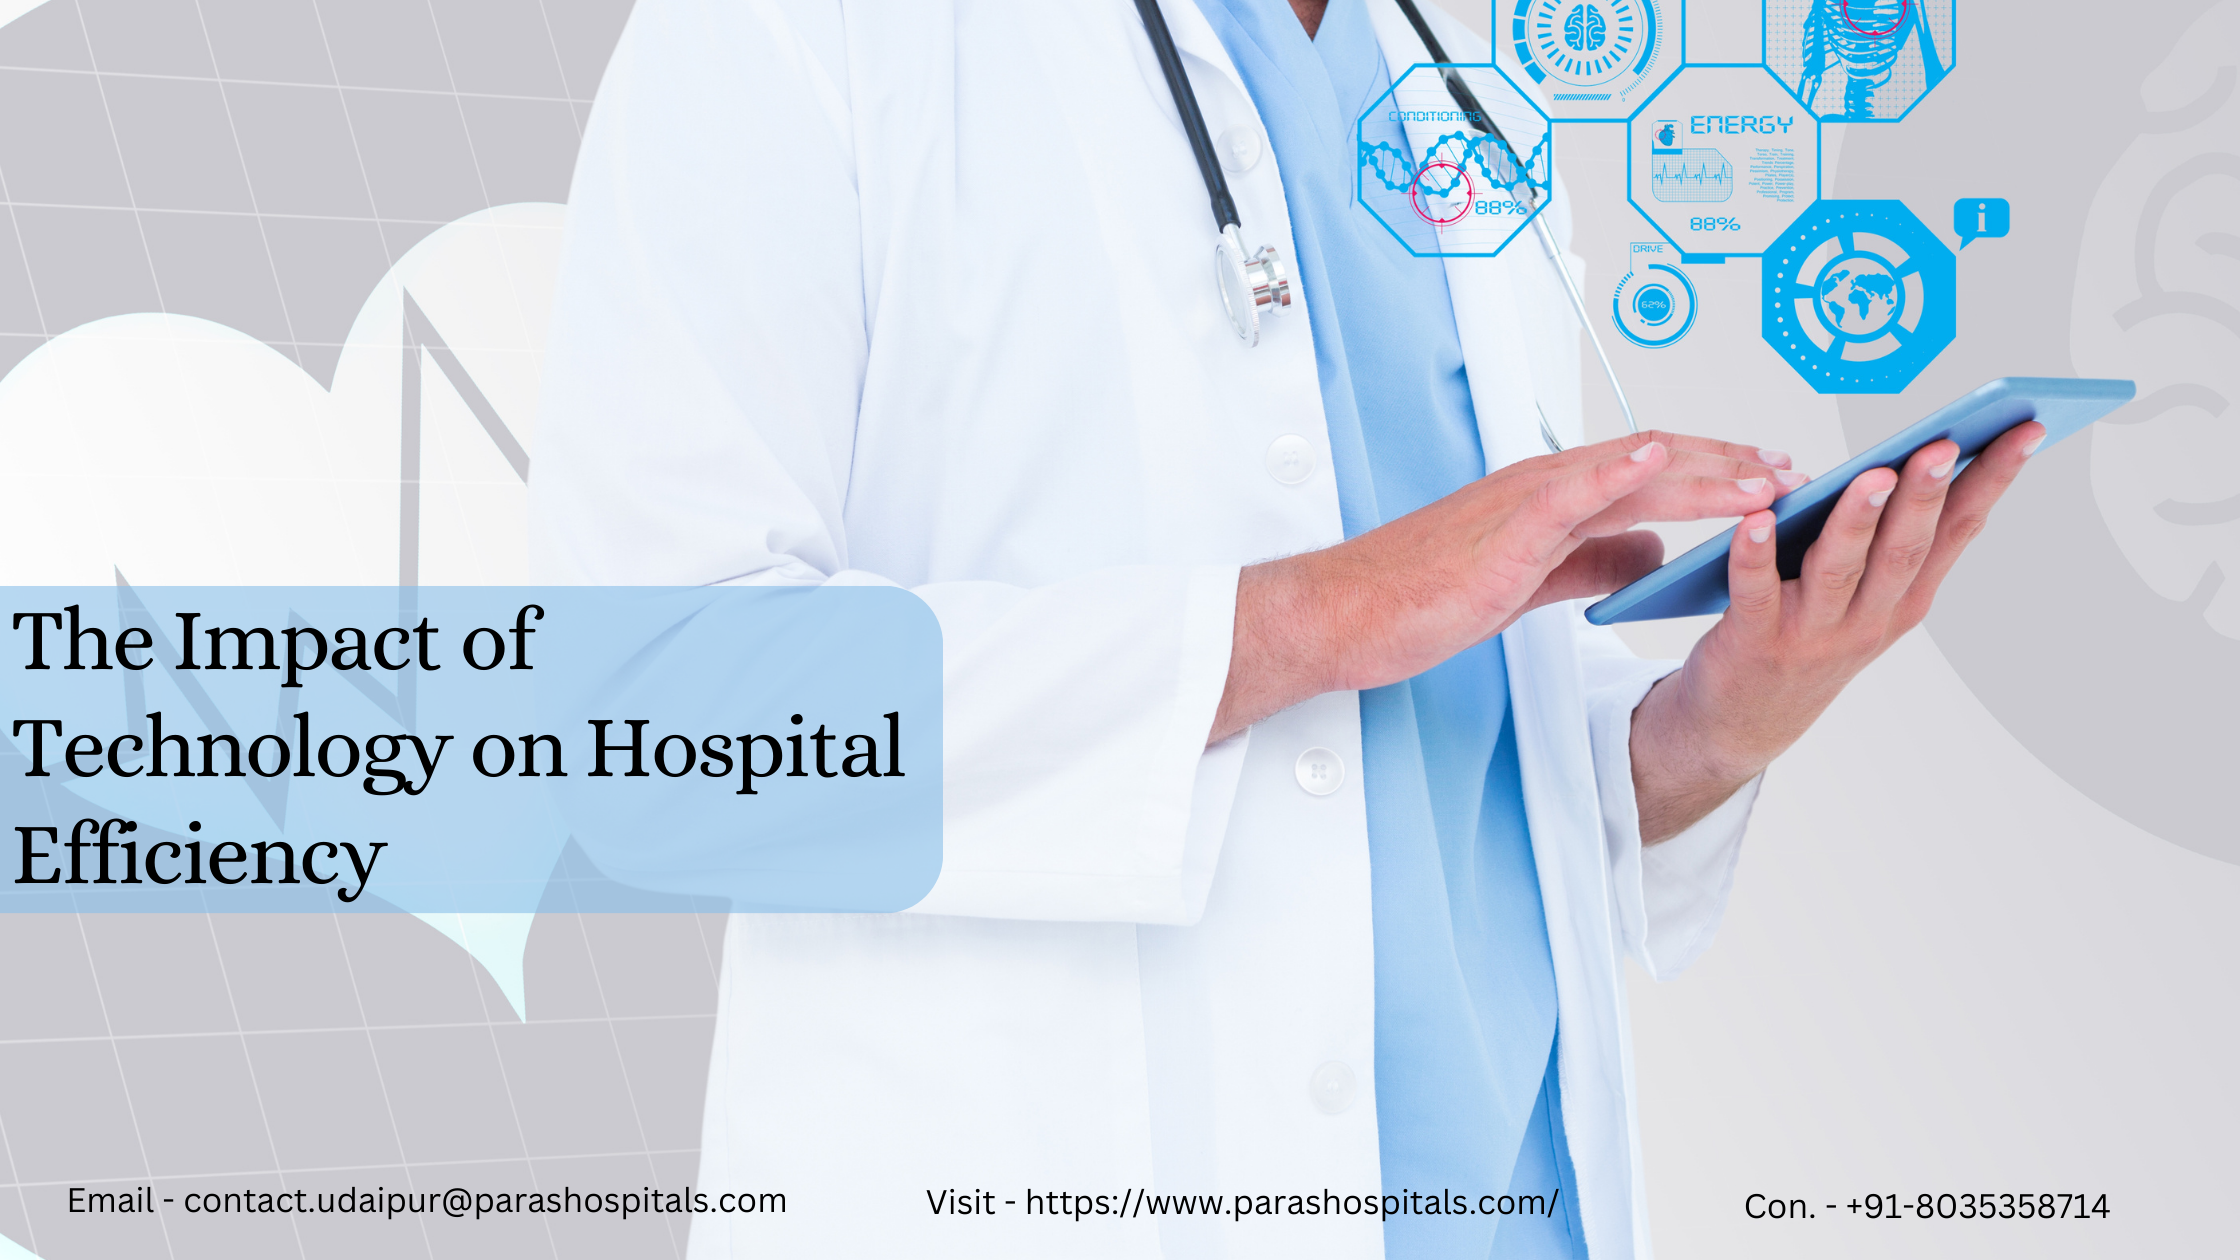 The Impact of Technology on Hospital Efficiency